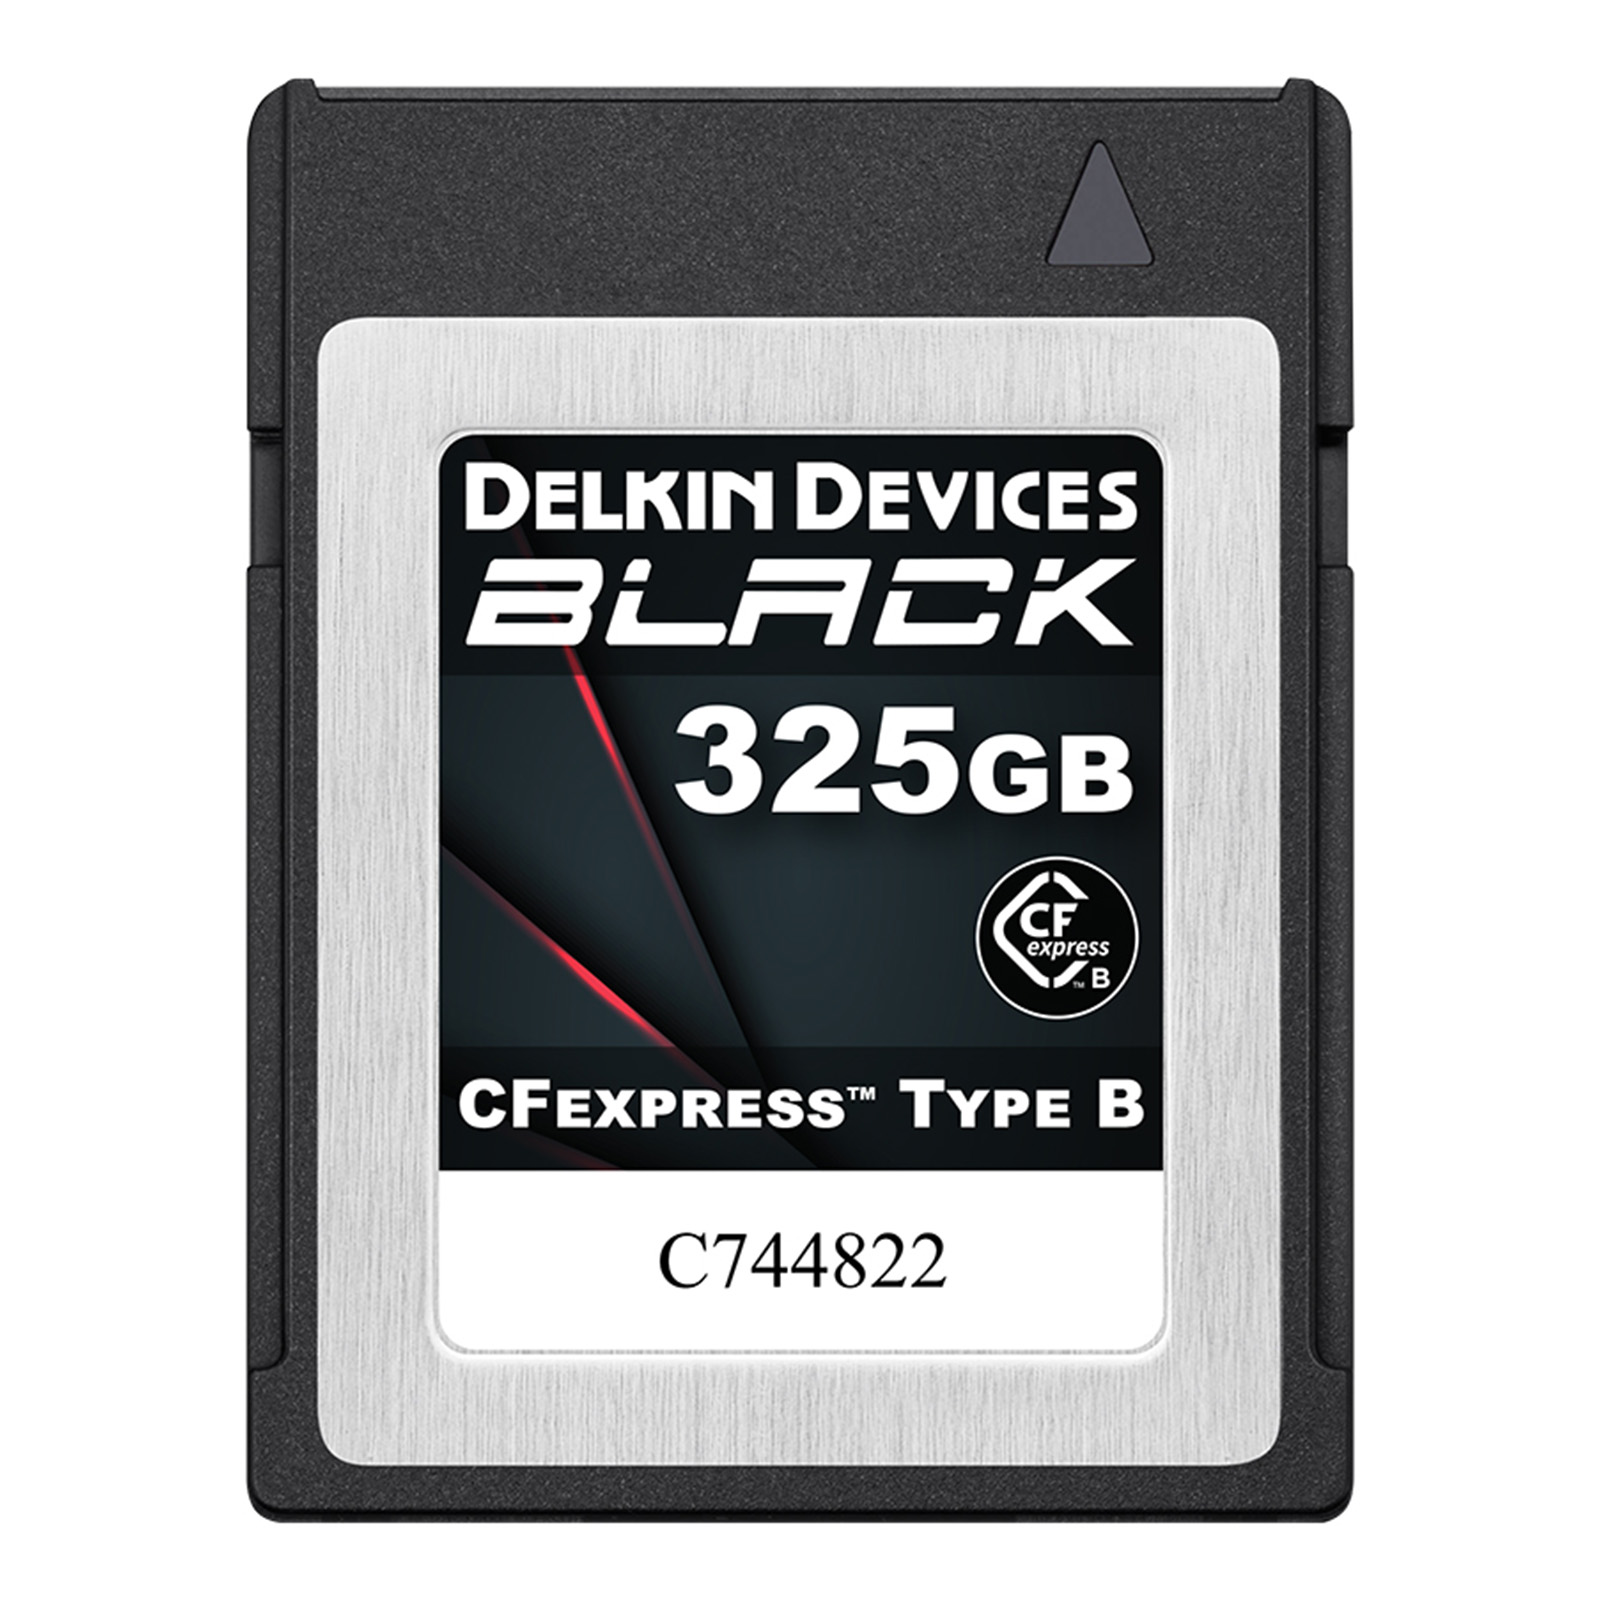 Image of Delkin BLACK 325GB 1800MB/s G4 CFexpress Type B Memory Card